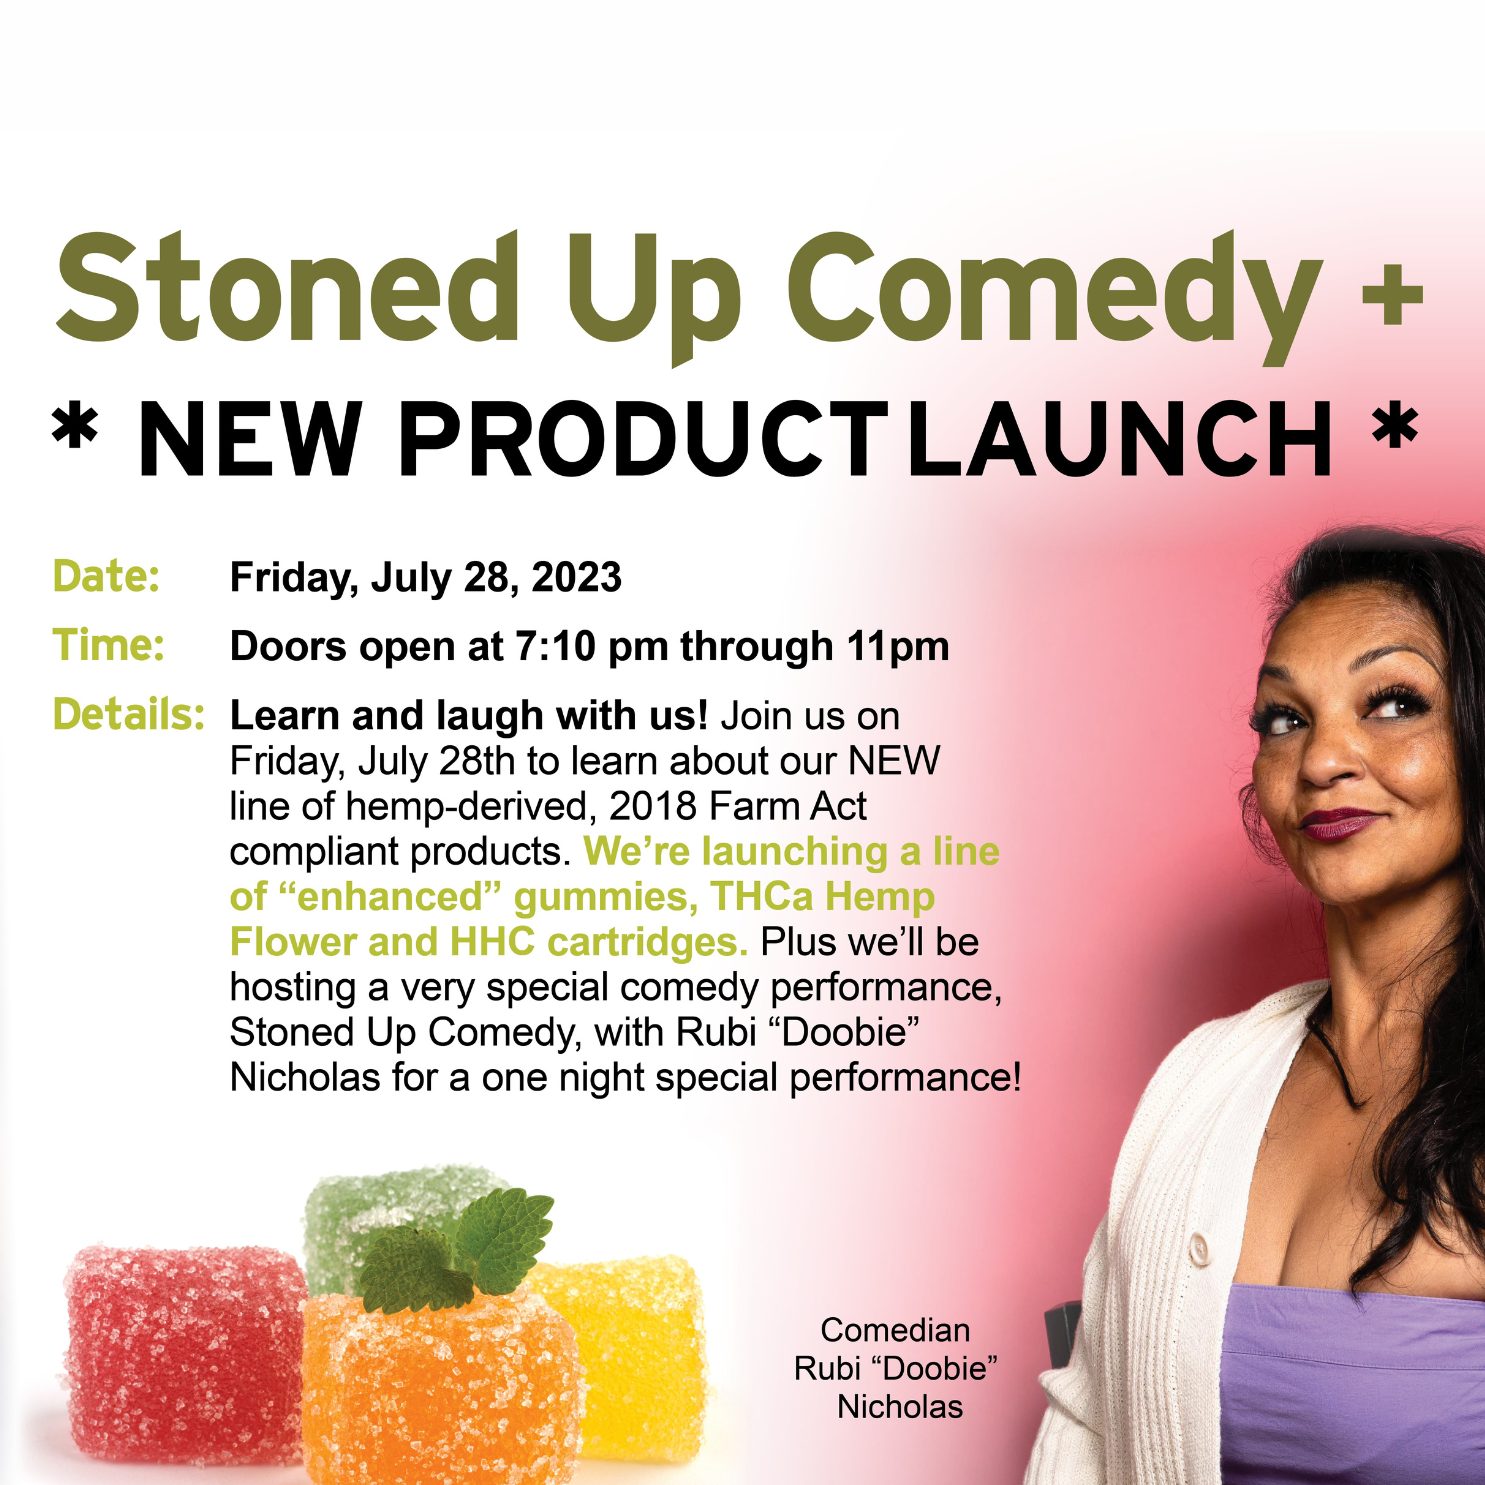 Stoned Up Comedy Night at Hempfield Apothetique | Lancaster PA Comedy